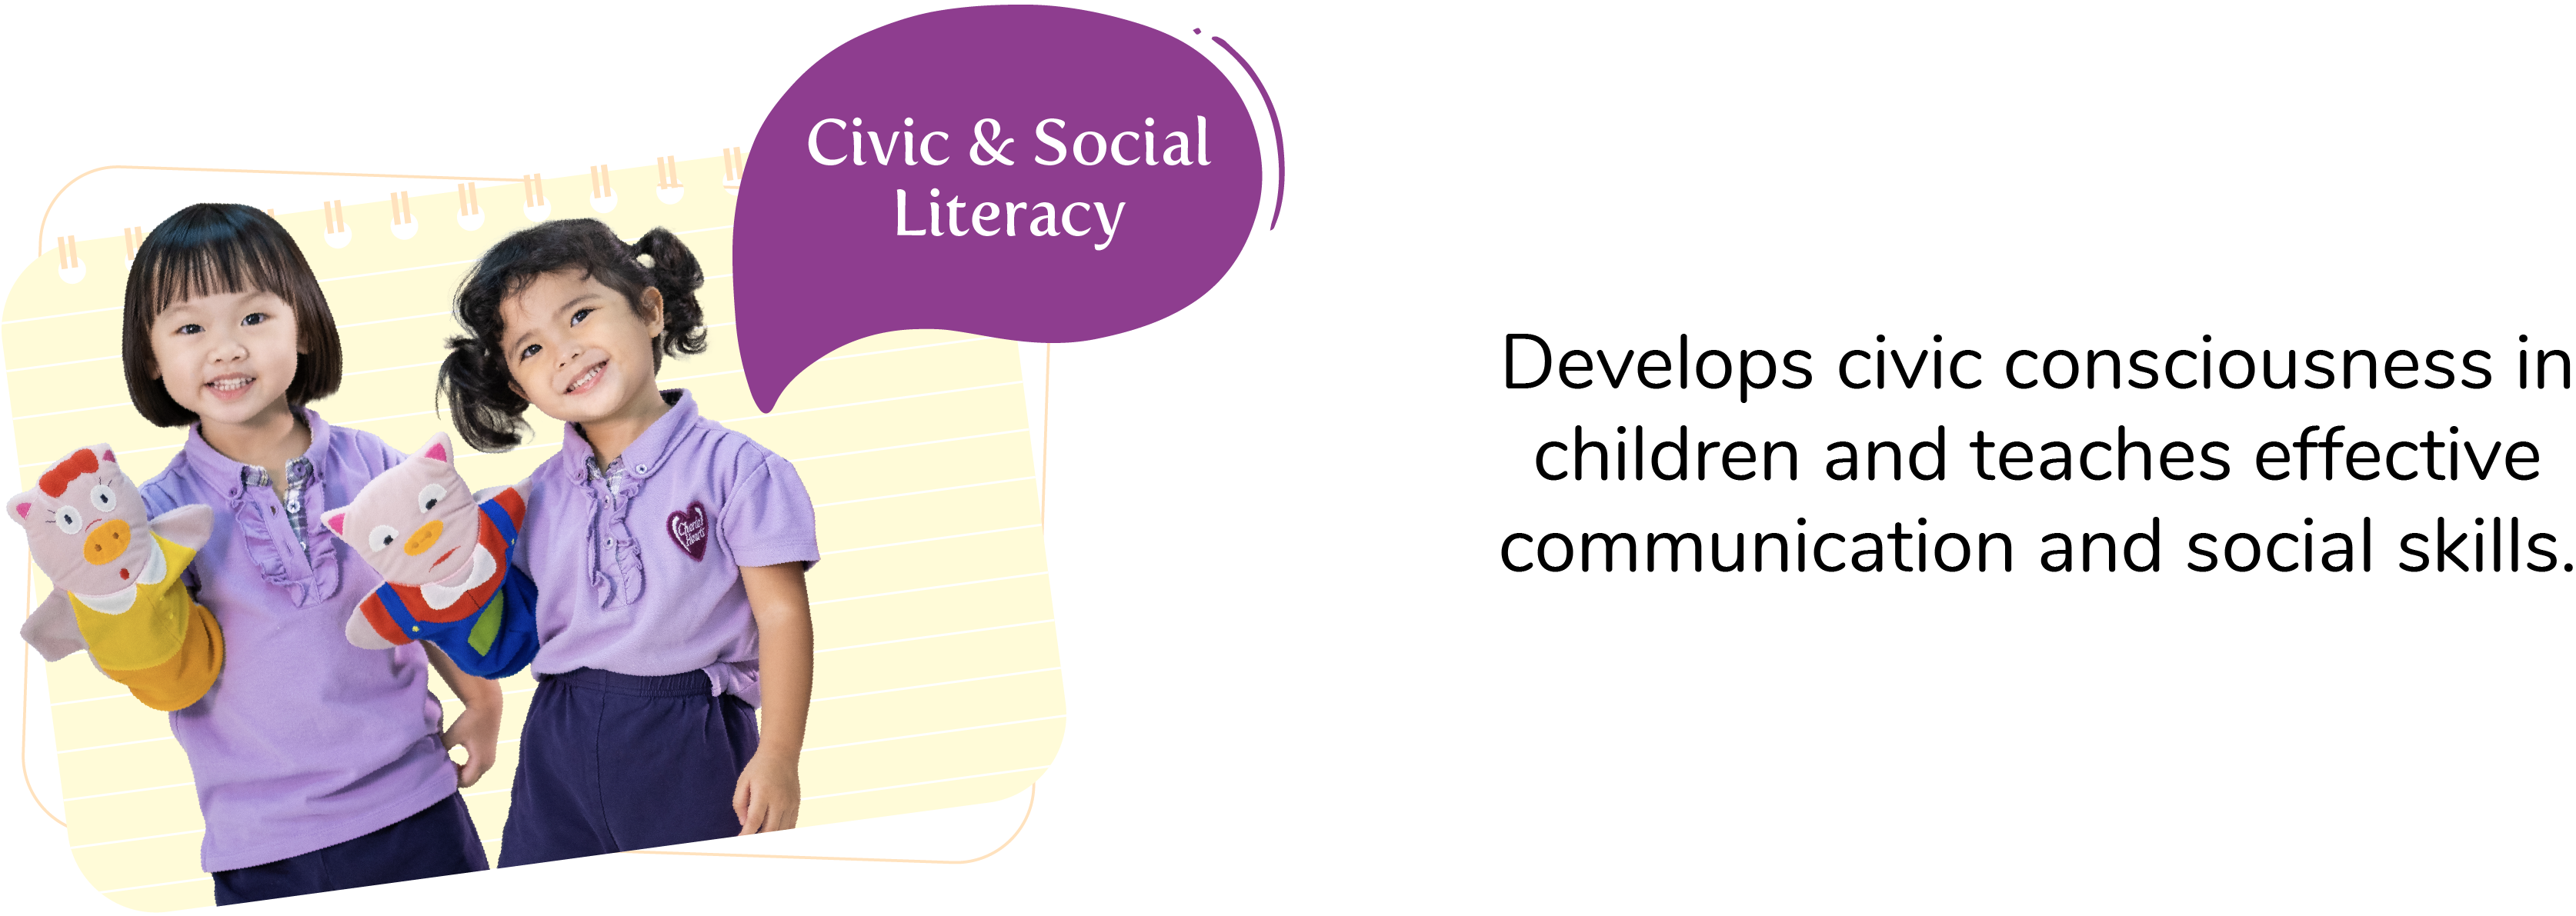 Develops civic consciousness in children and teaches effective communication and social skills.